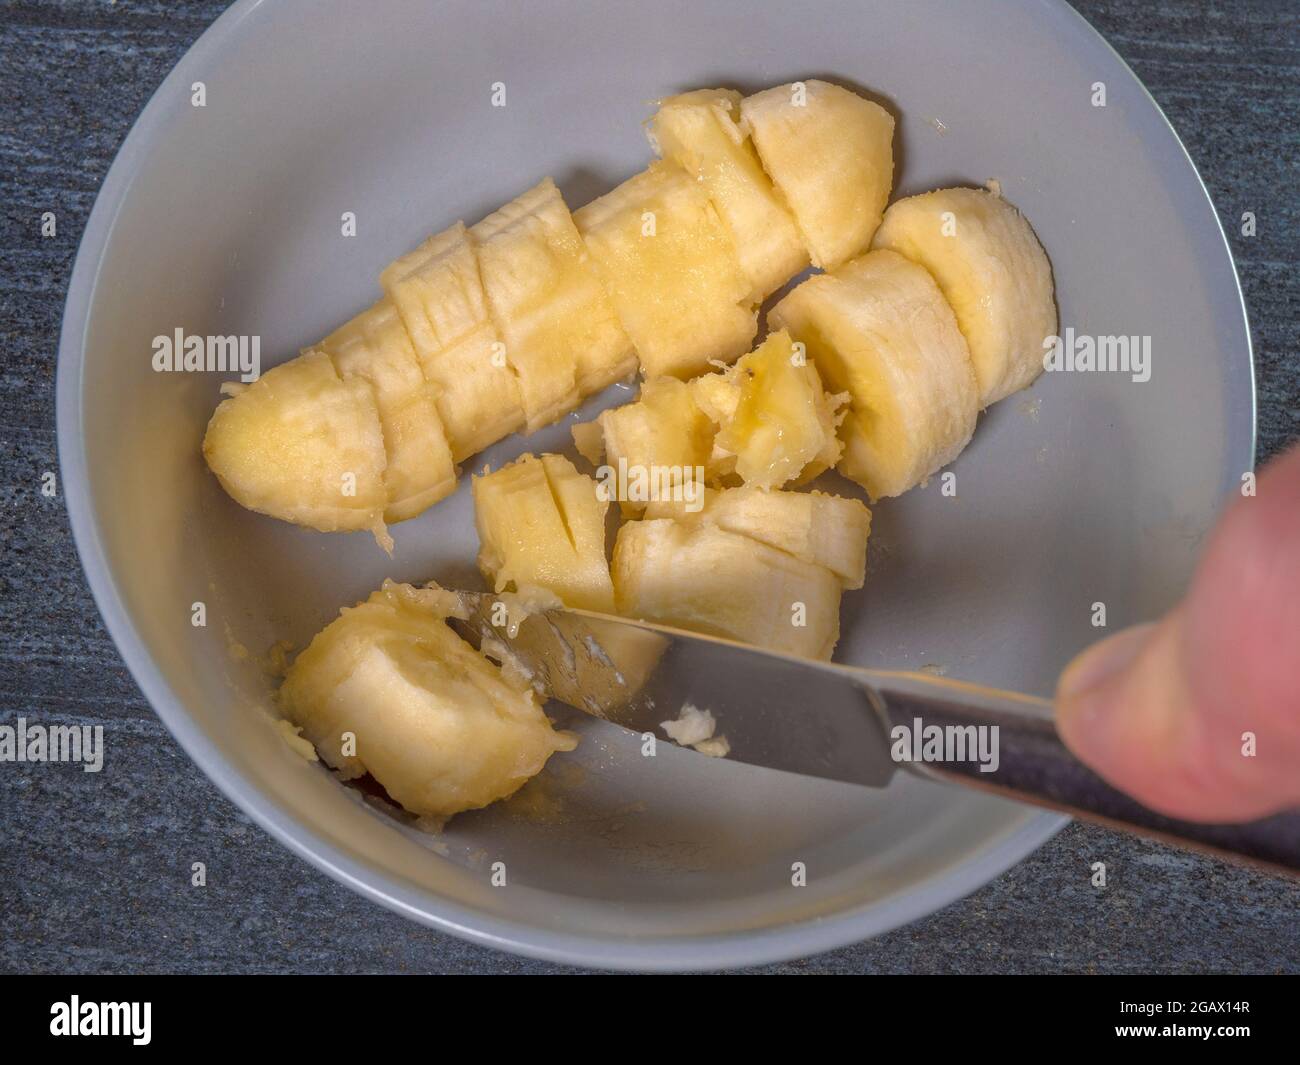 Closeup POV overhead shot of a soft ripe banana in a bowl, with the skin removed, being cut into slices with a steel knife. Stock Photo